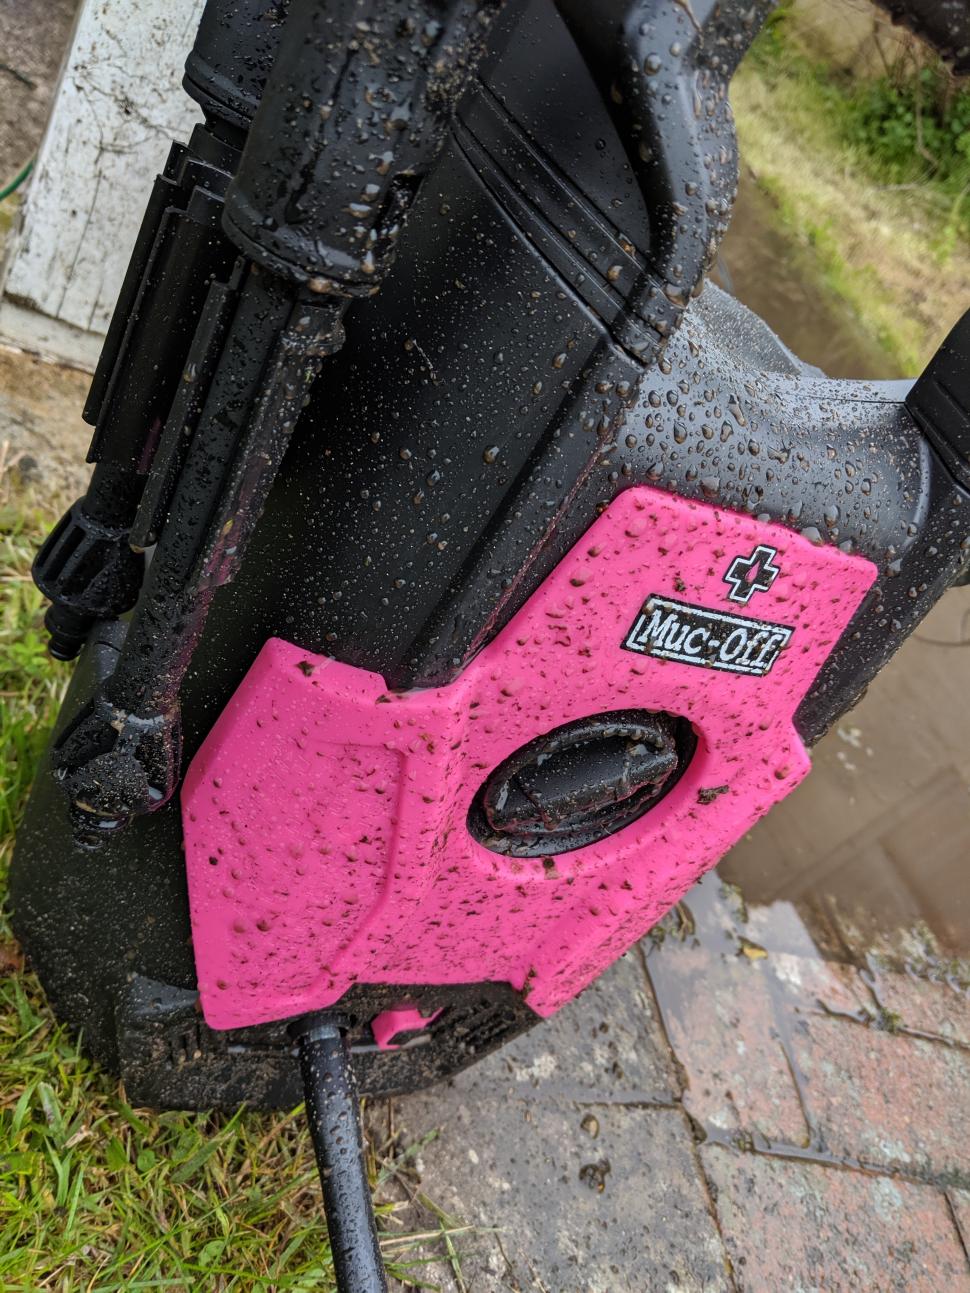 Muc-Off Pressure Washer Review  Hilariously effective tool that's great  for non-bike applications too - Flow Mountain Bike